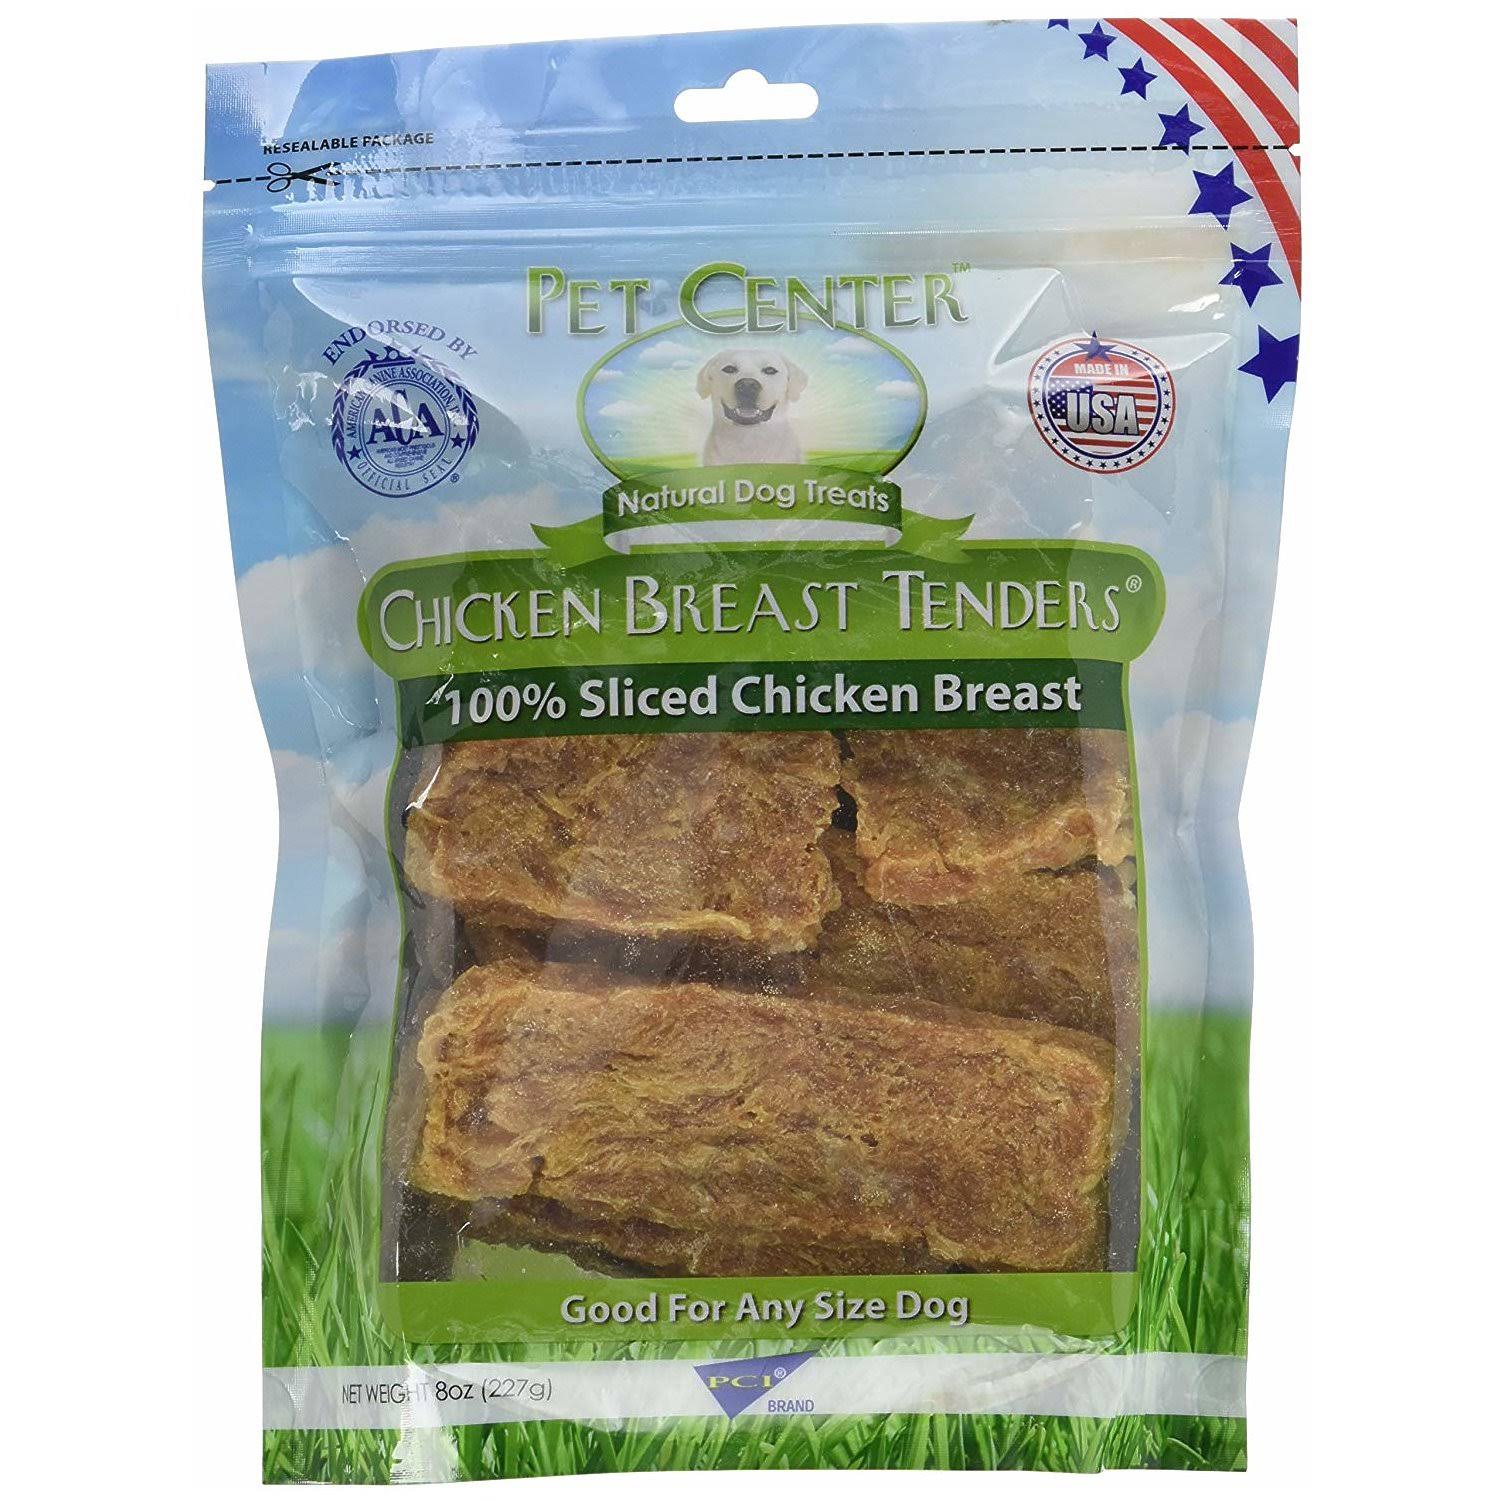 PCI Natural Dog Treats - Chicken Breast Tenders, 4lbs